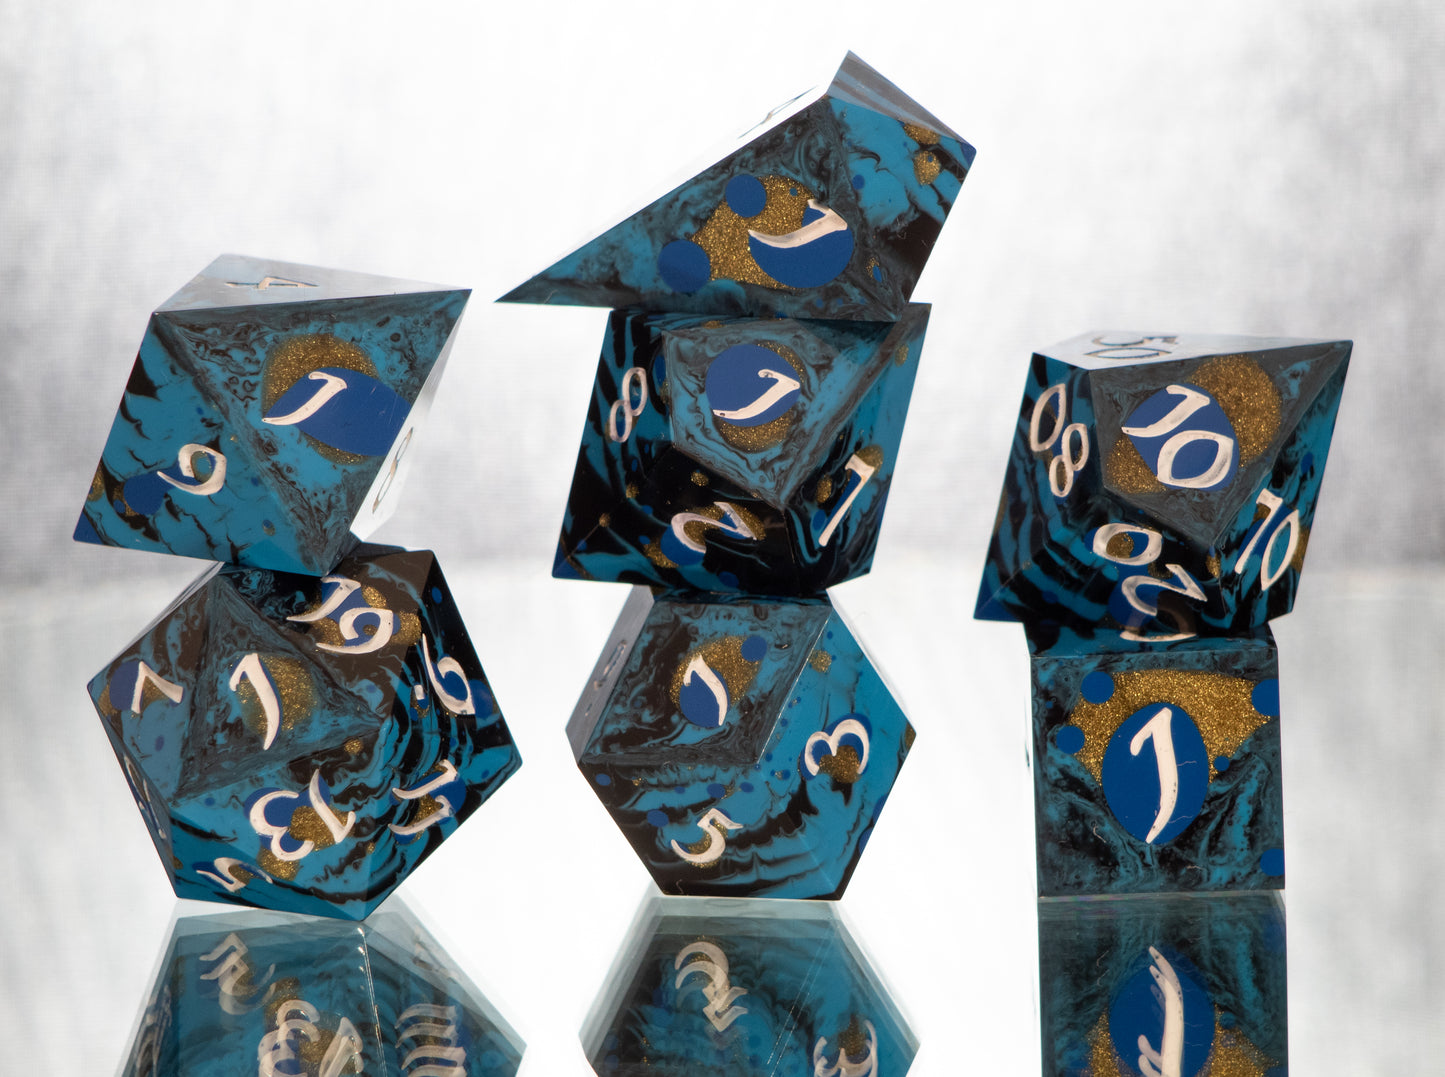 Chaotic Waters - Alt 7 Piece Handmade Resin Dice